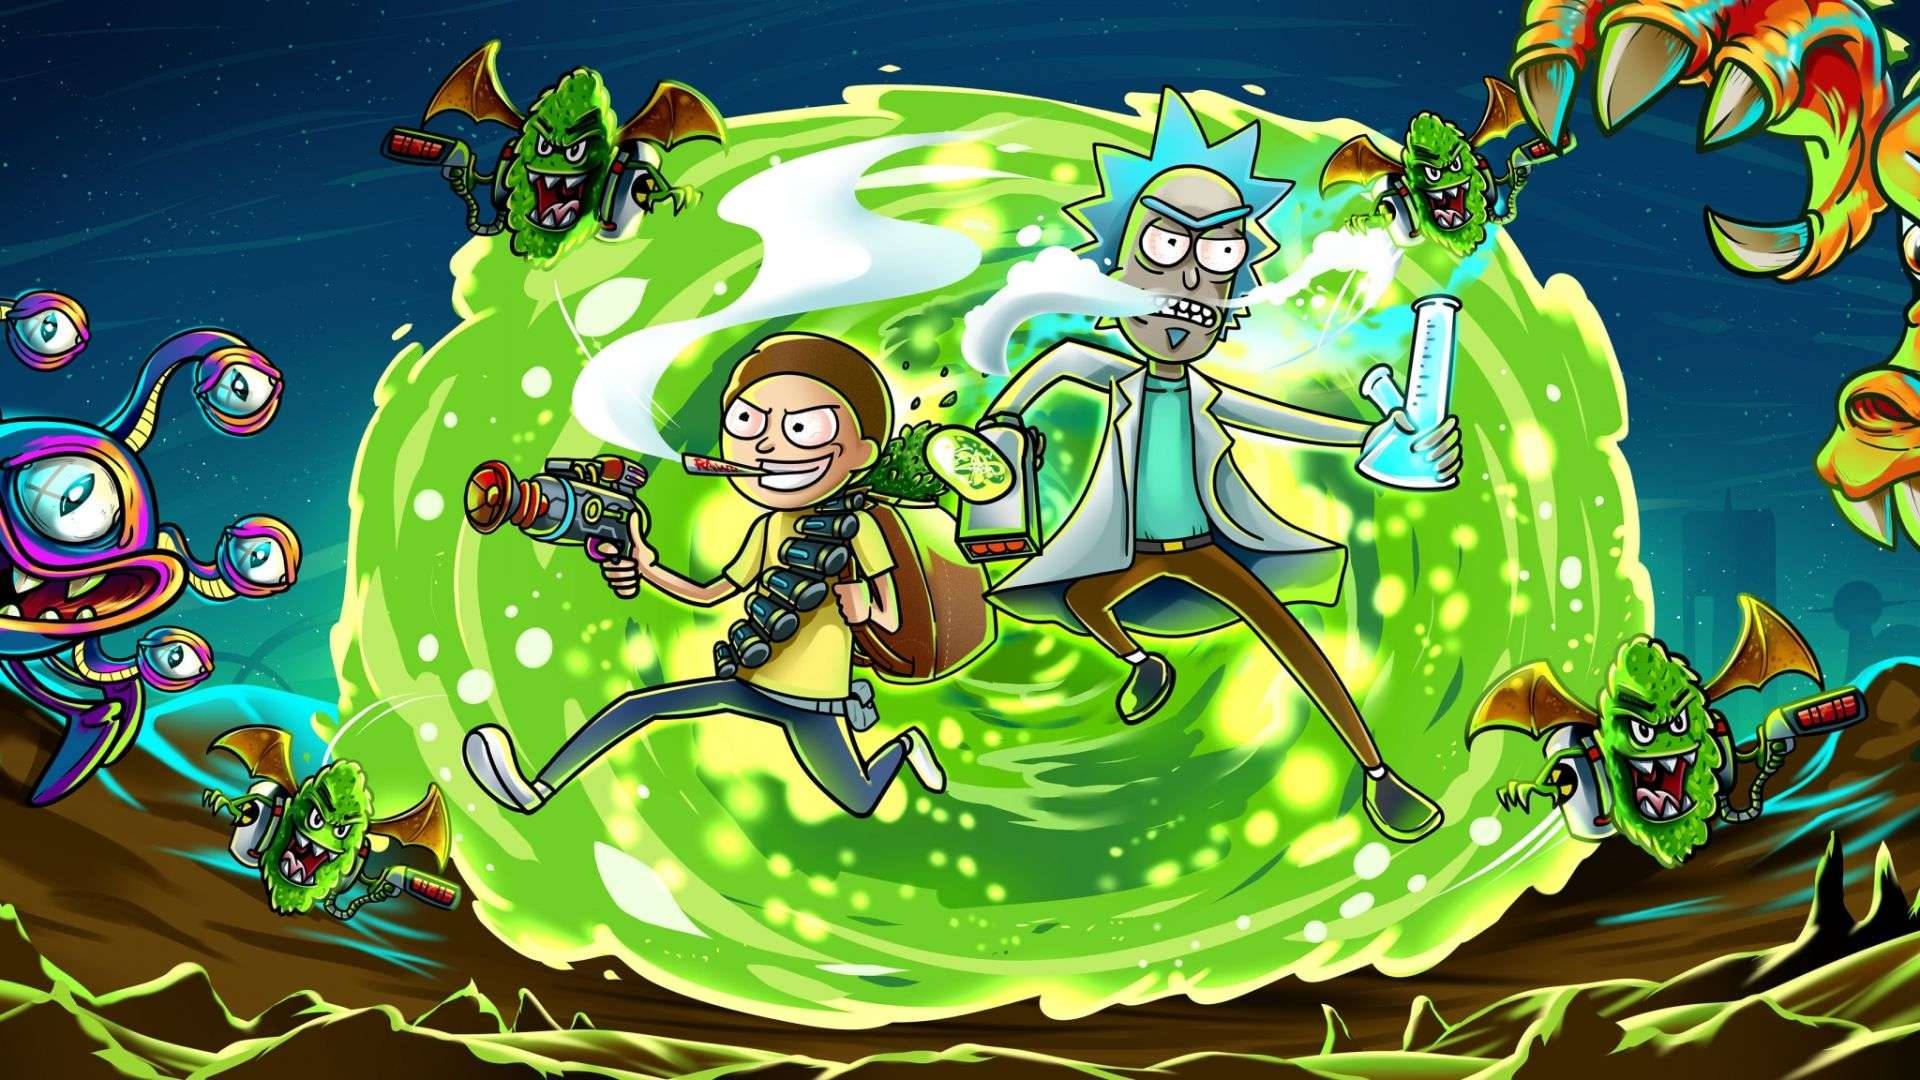 Free Cool Rick And Morty Wallpaper Downloads, [100+] Cool Rick And Morty  Wallpapers for FREE 